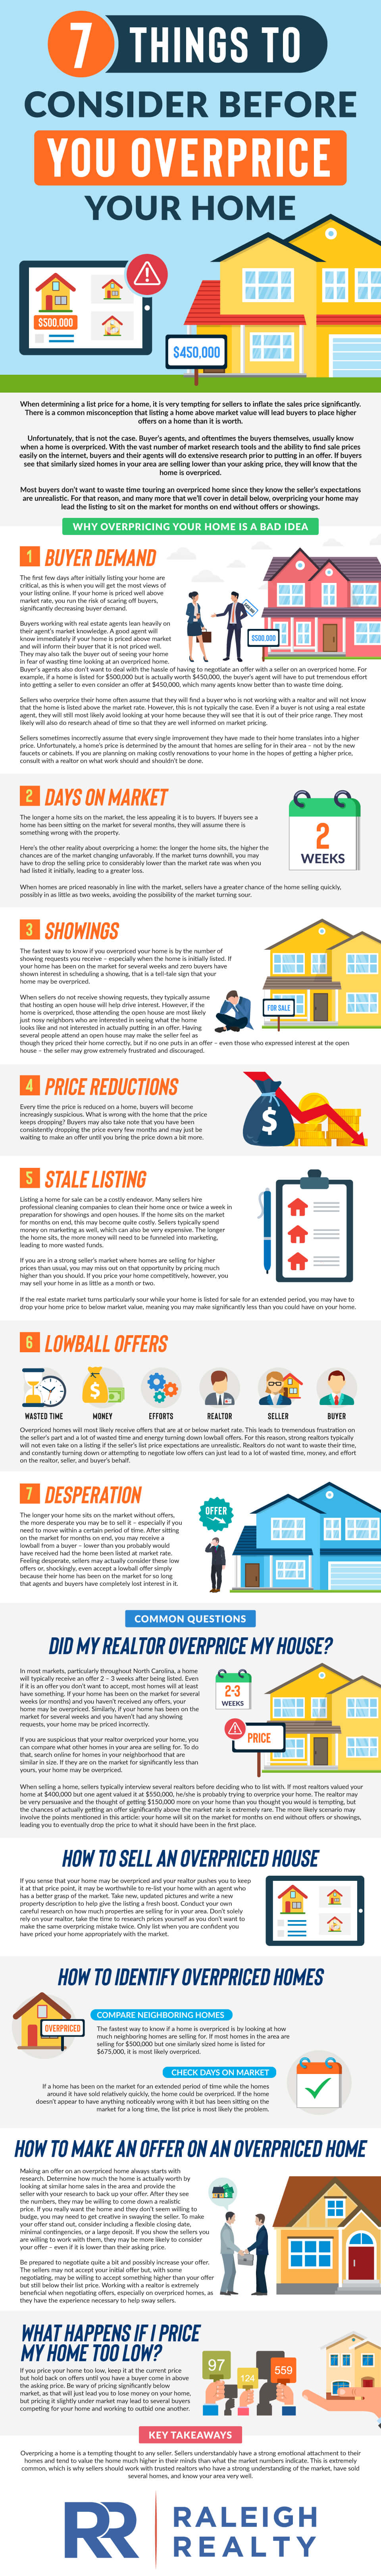 Why overpricing your home is a bad idea and 7 things to consider before you overprice a home!